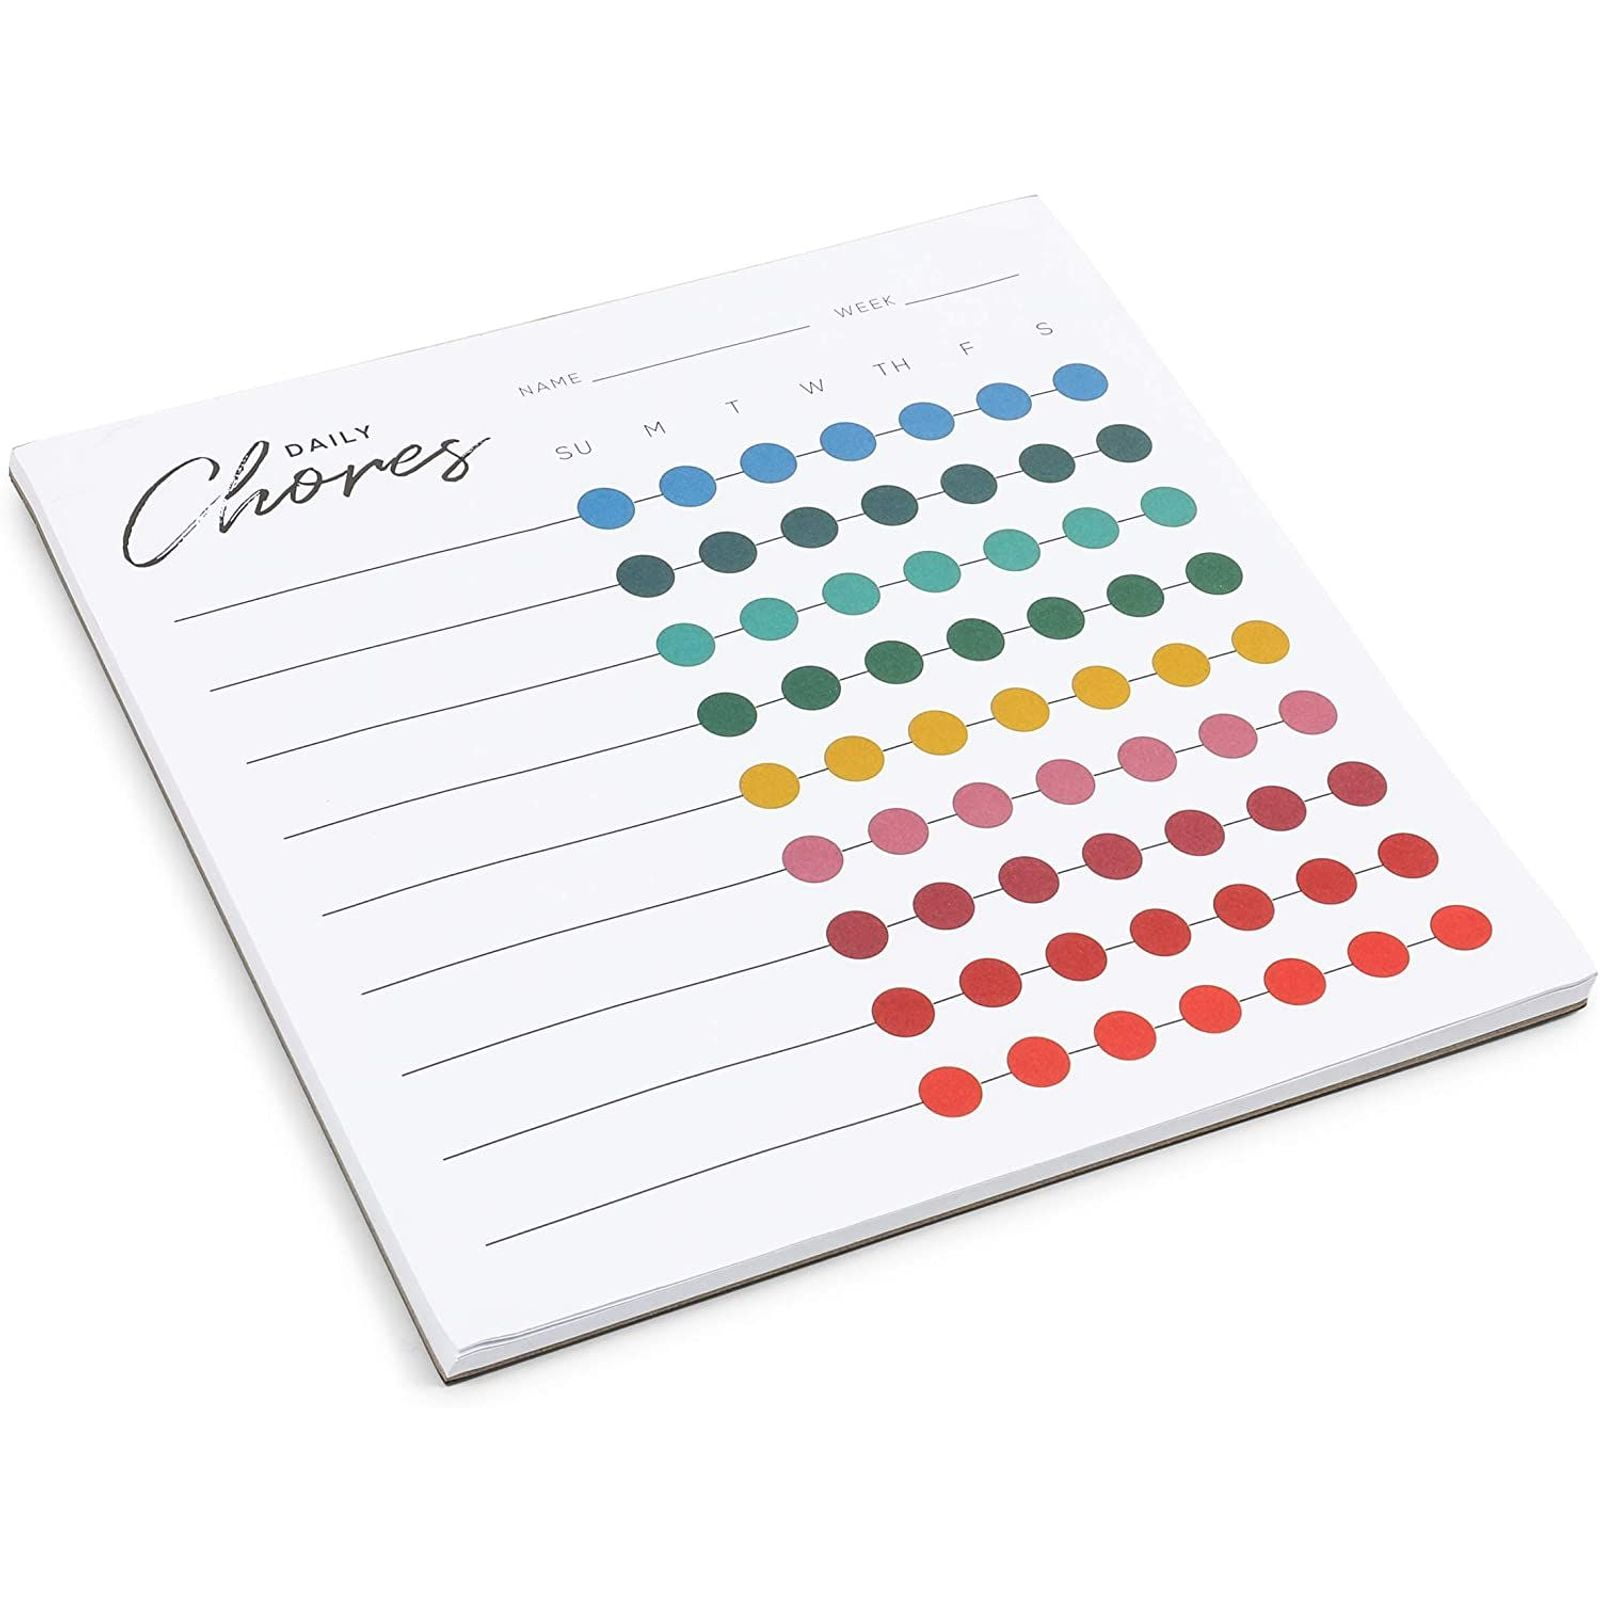 A4 Magnetic Laminated Chore Chart Sheet With Pen 